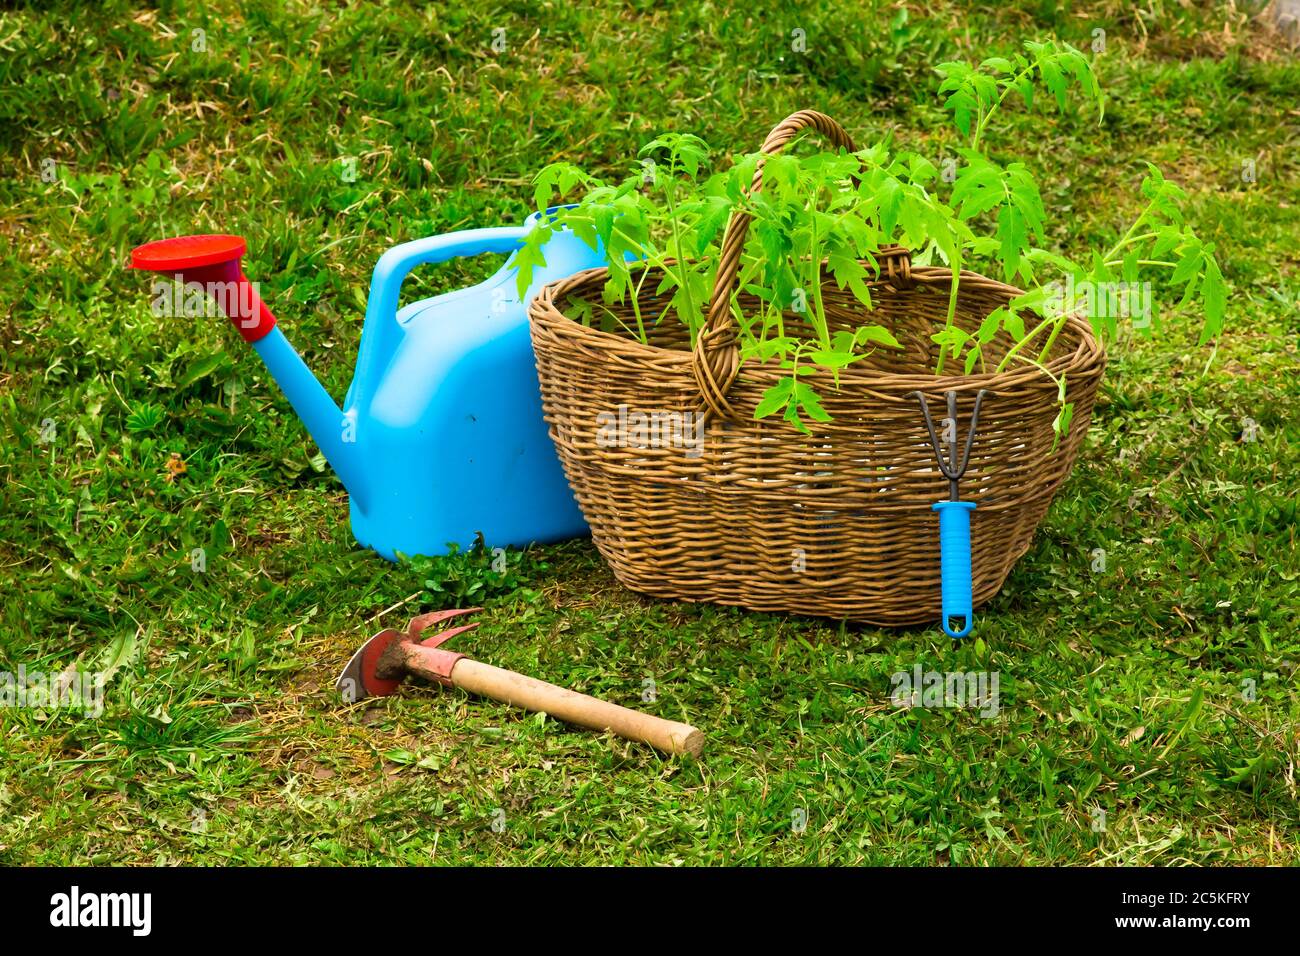 Preparing tomato seedlings for planting in a greenhouse. Wicker basket with tomato seedlings close-up. Watering can and gardening tool close-up Stock Photo